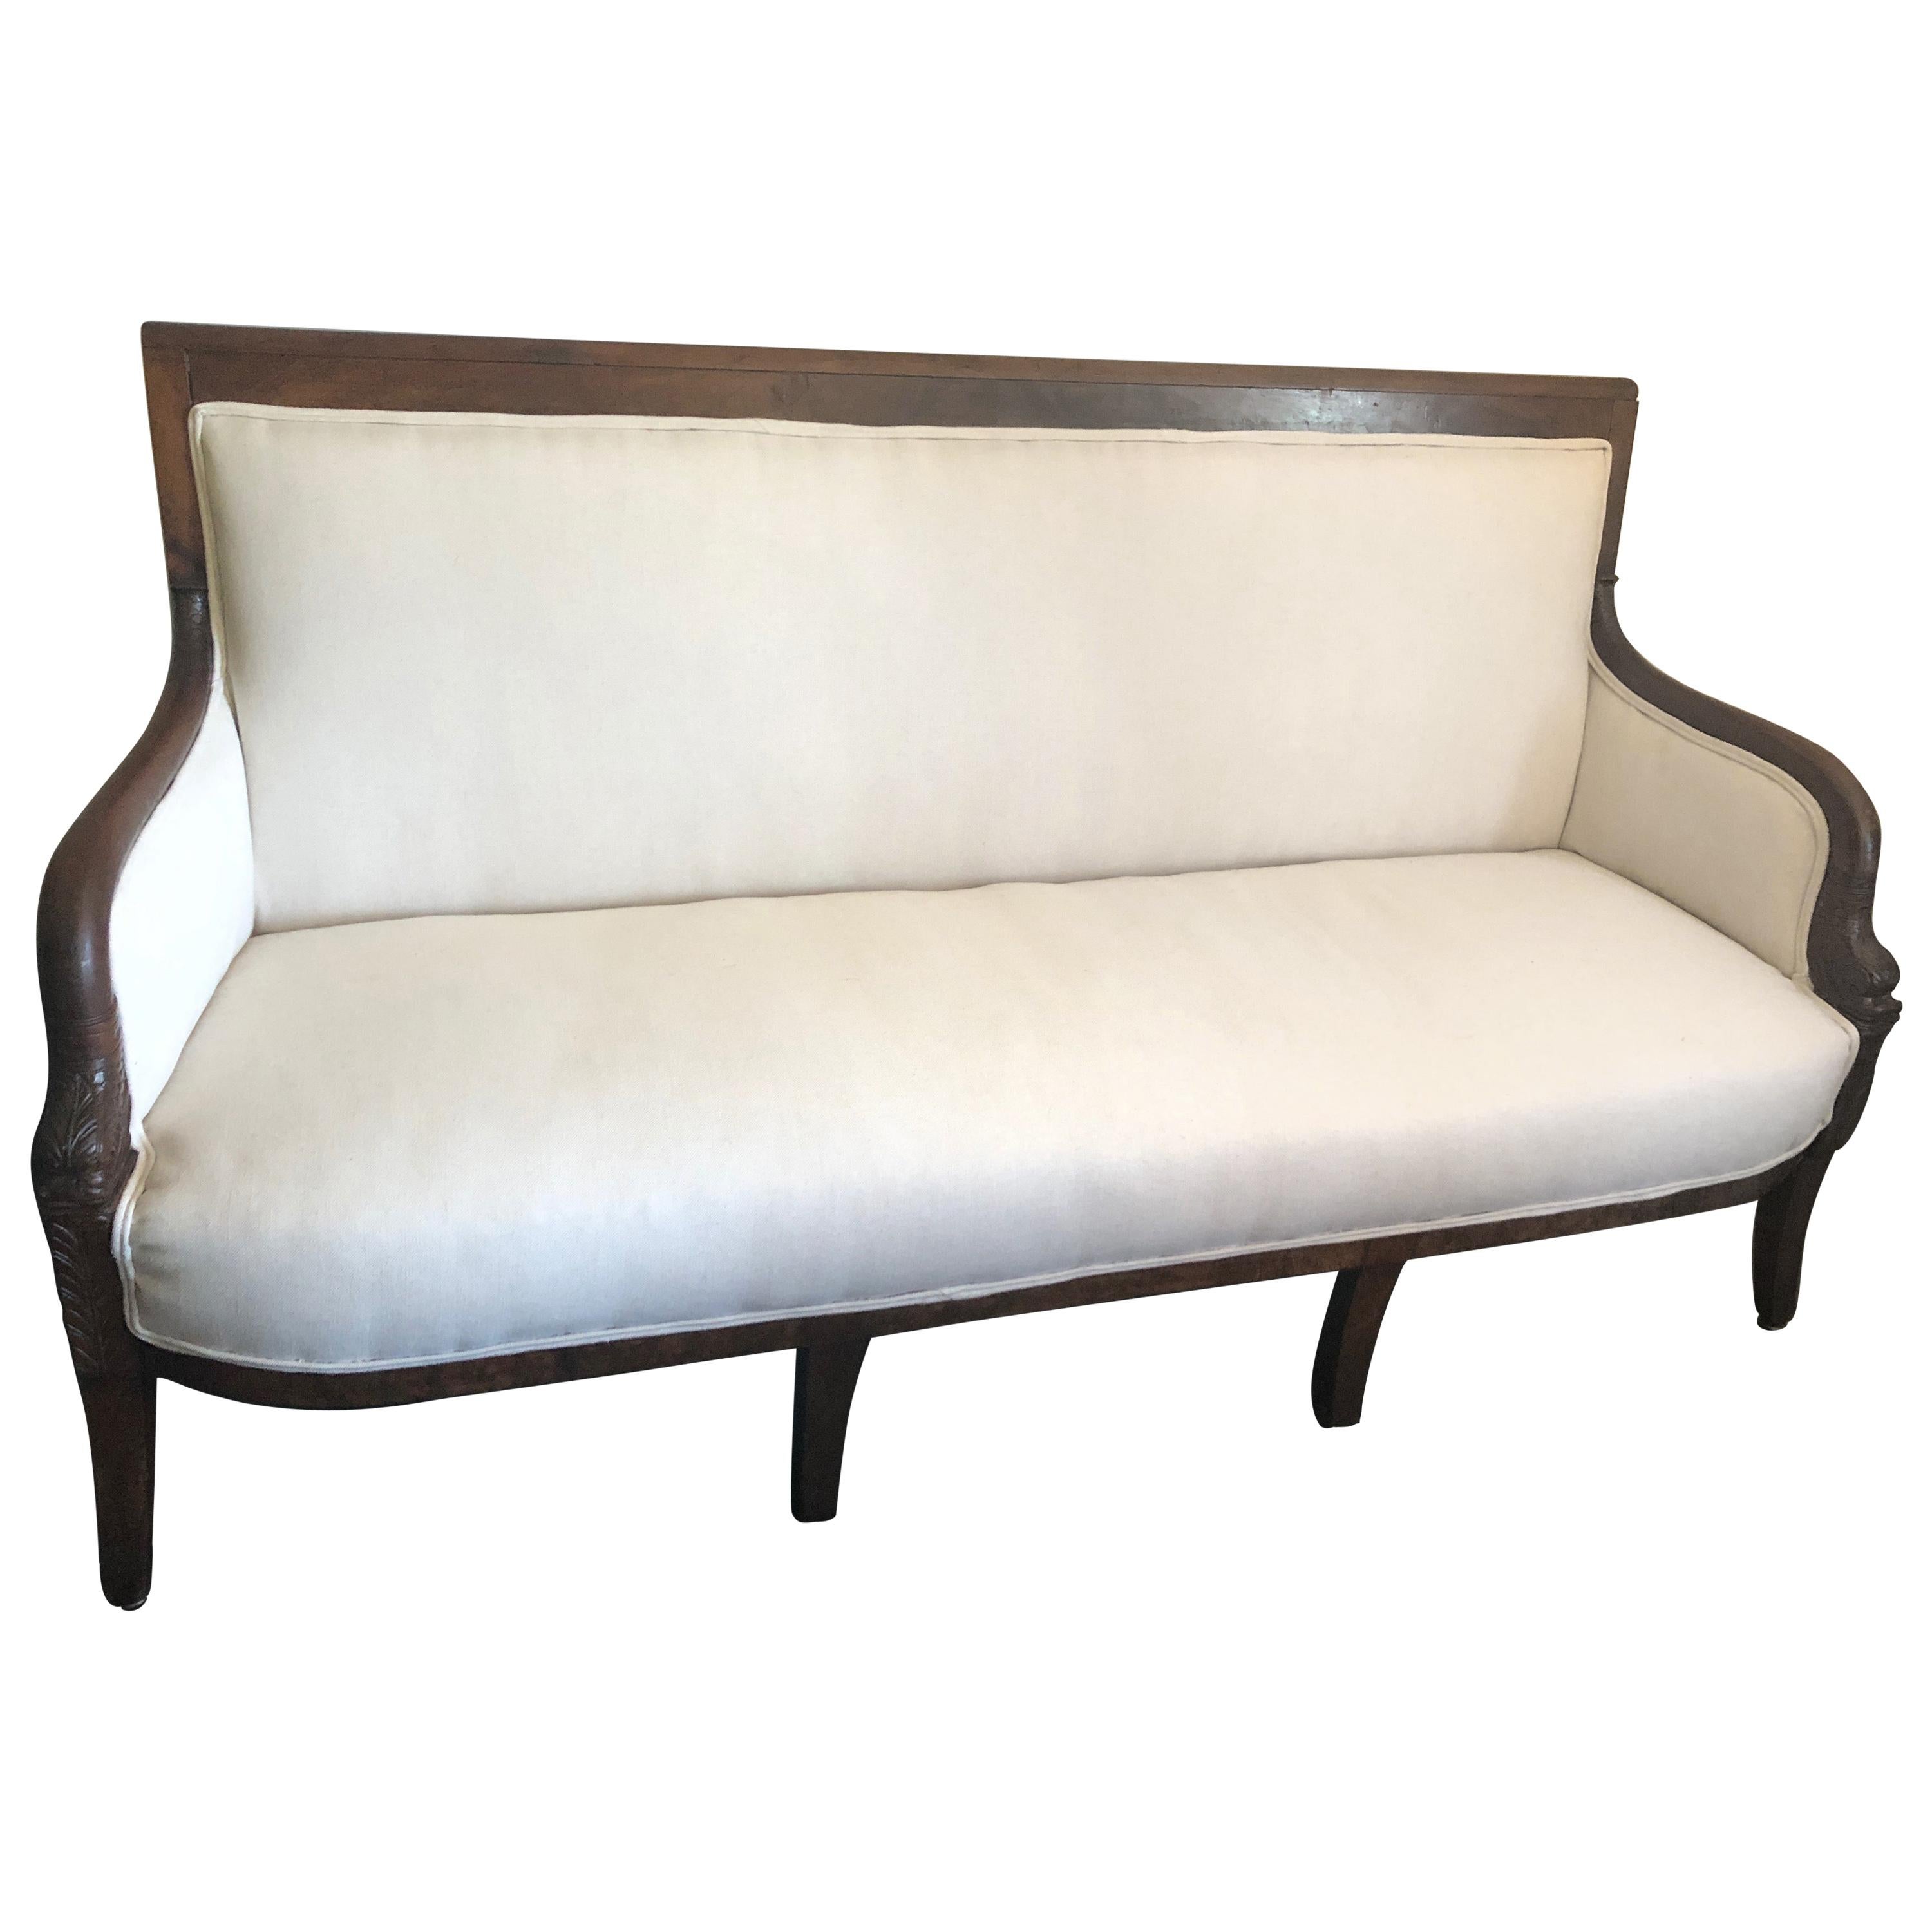 Classic French Empire Carved Walnut Sofa with Dolphin Arms